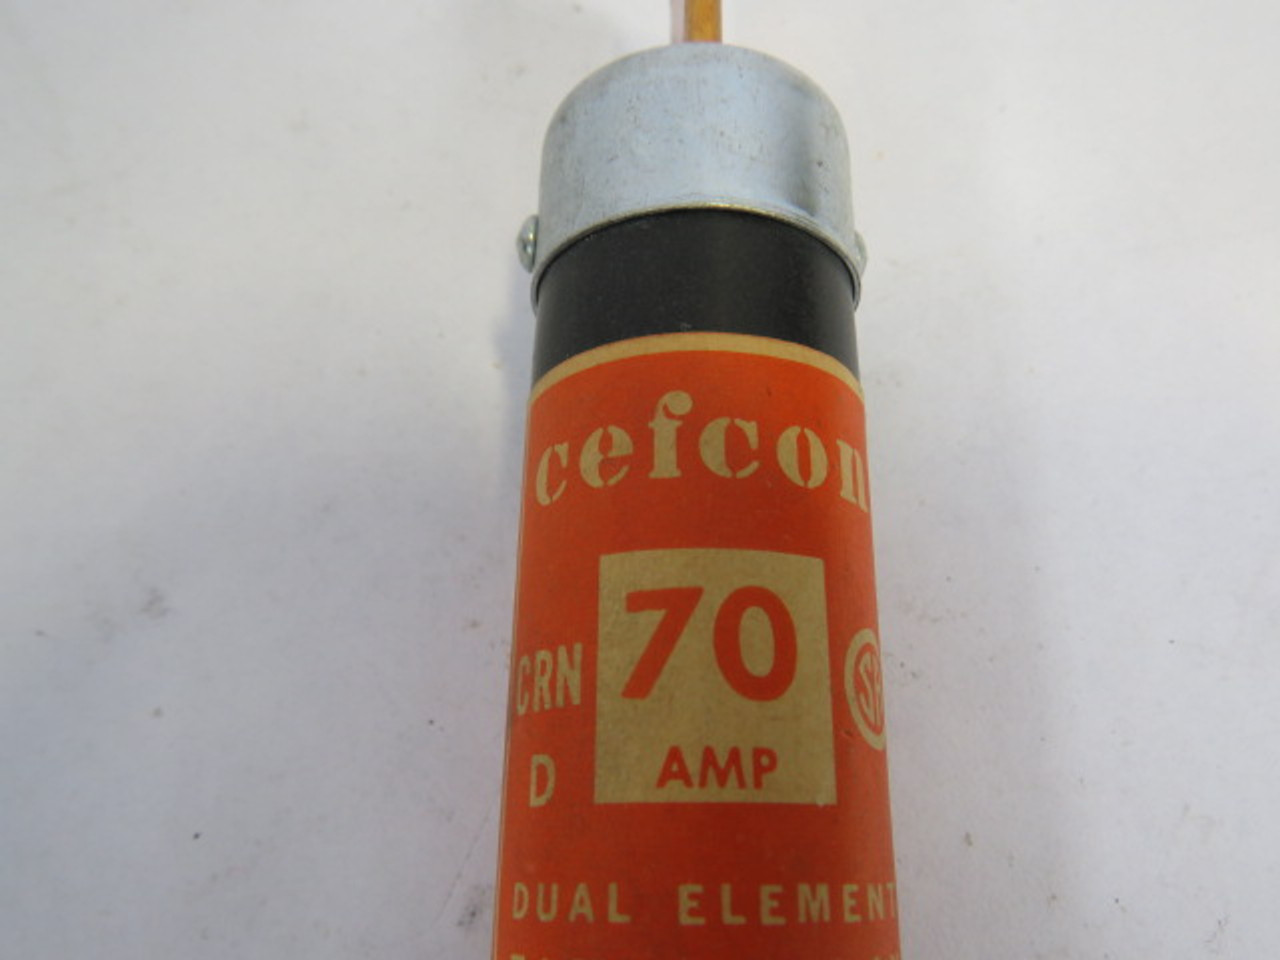 Cefcon CRN70 Dual Element Time Delay Fuse 70A 250V USED